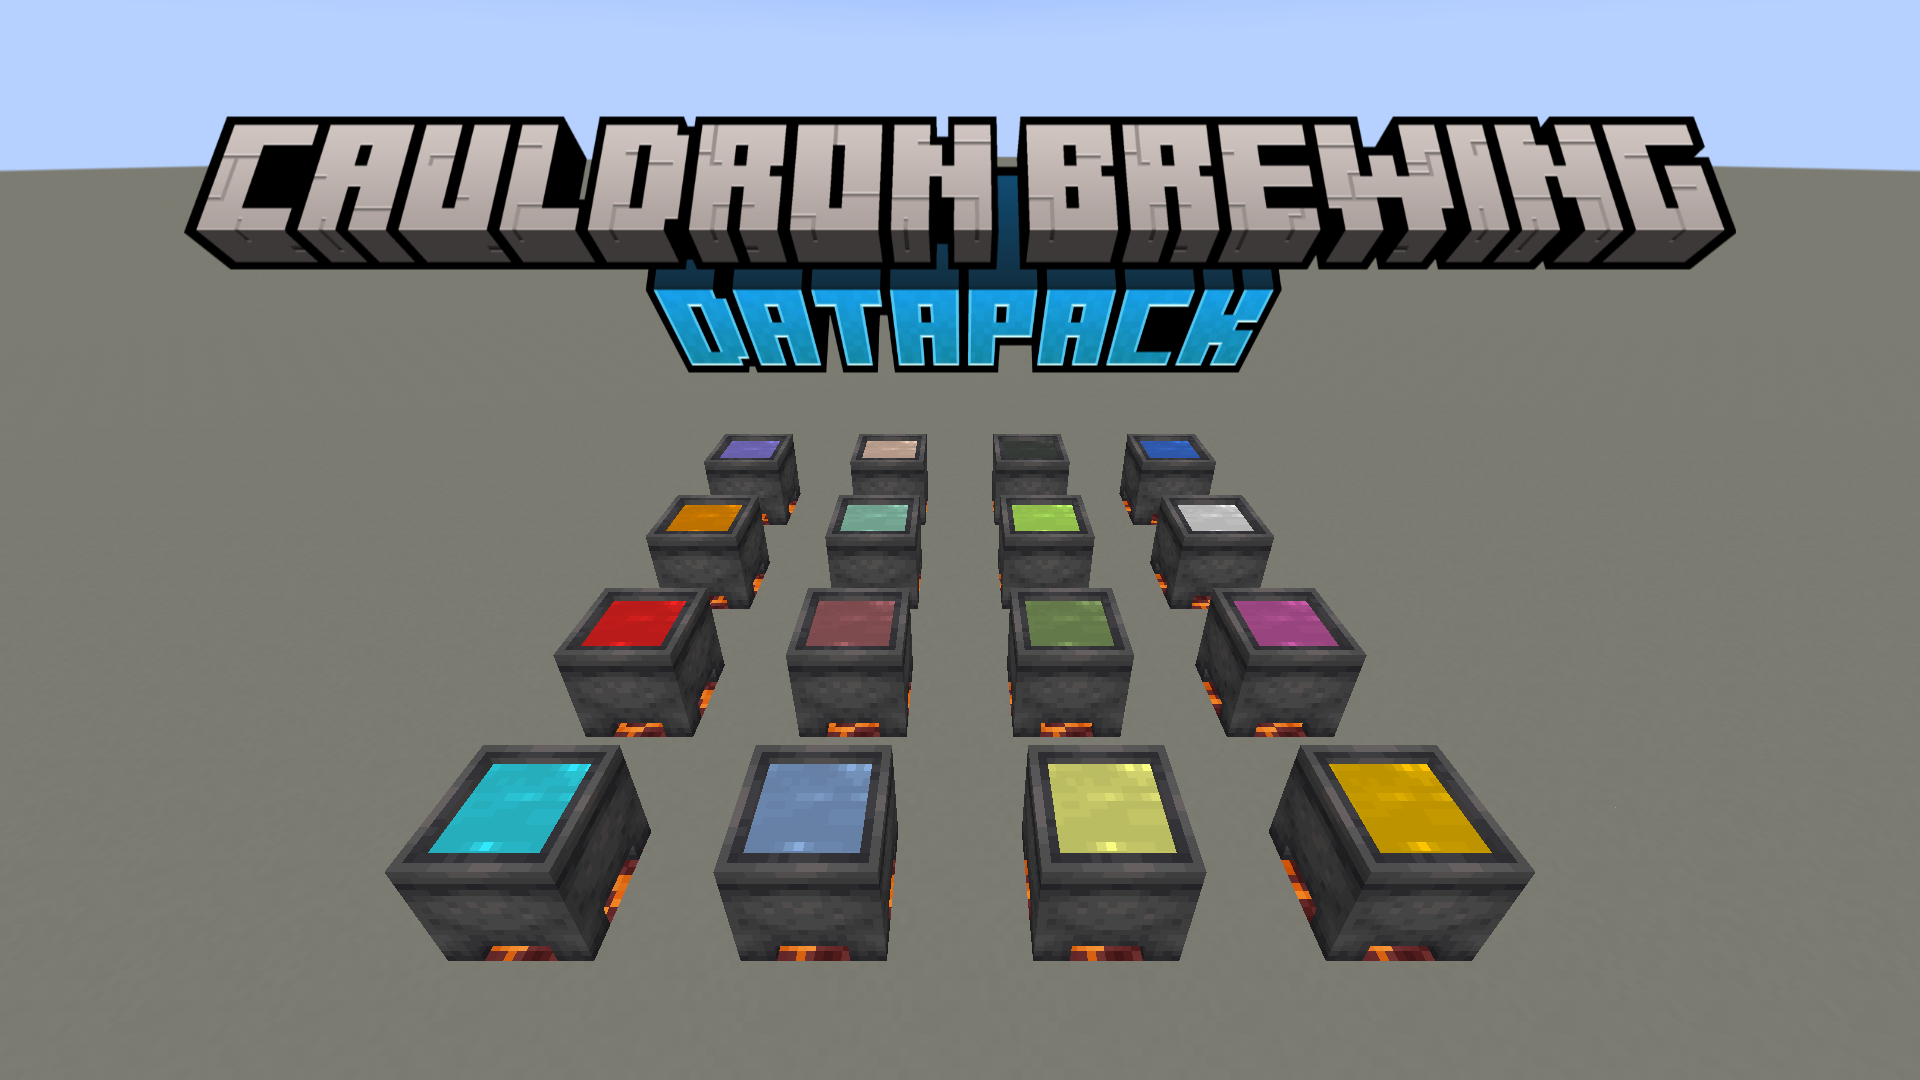 Title image showing off all the different potion colors in cauldrons